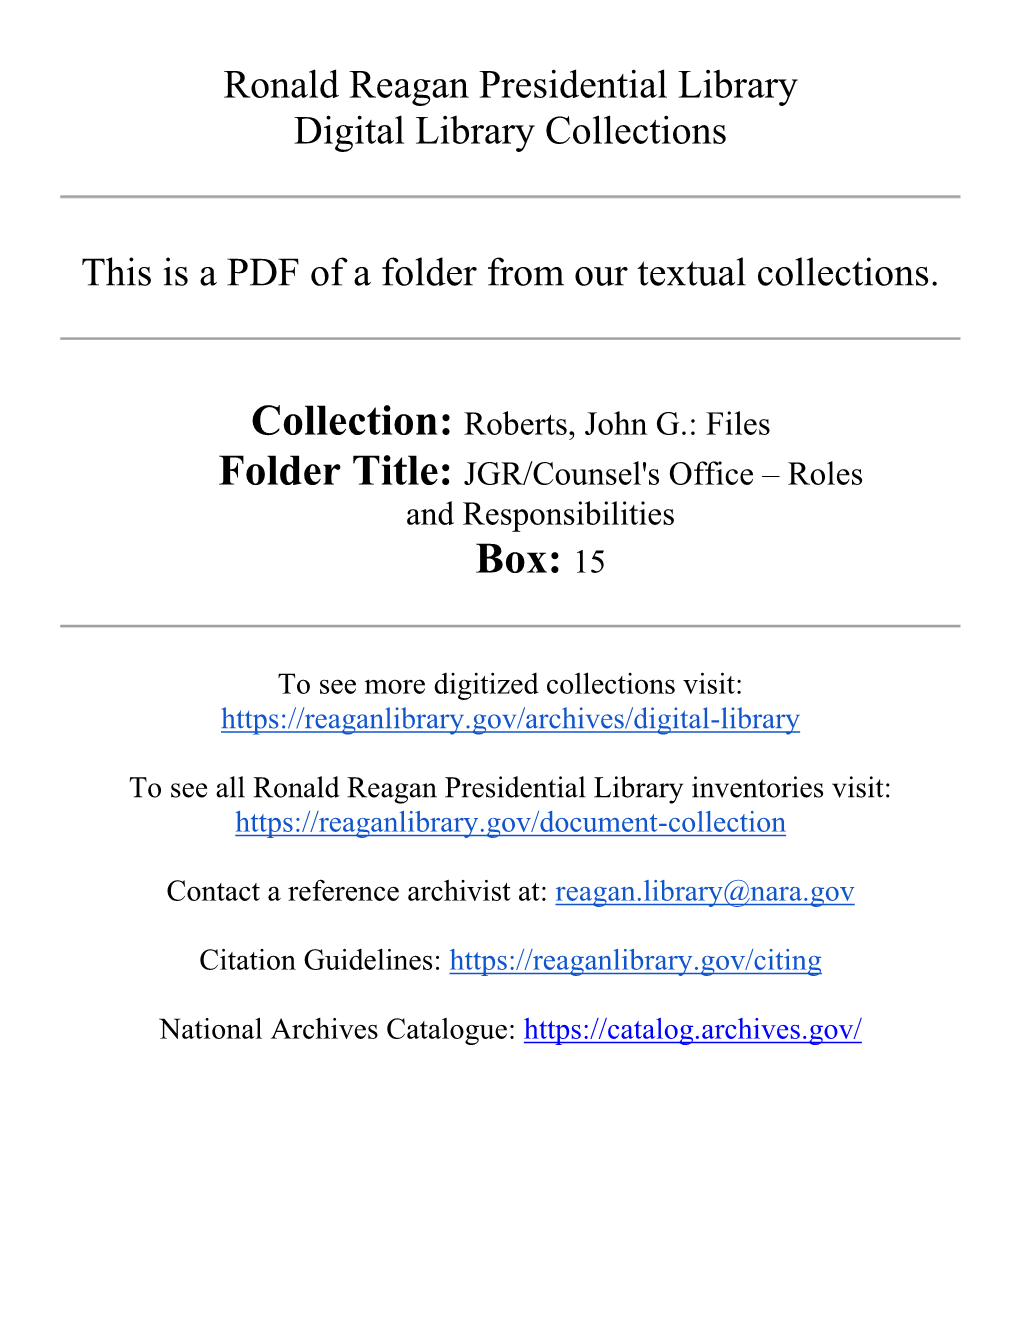 Files Folder Title: JGR/Counsel's Office – Roles and Responsibilities Box: 15